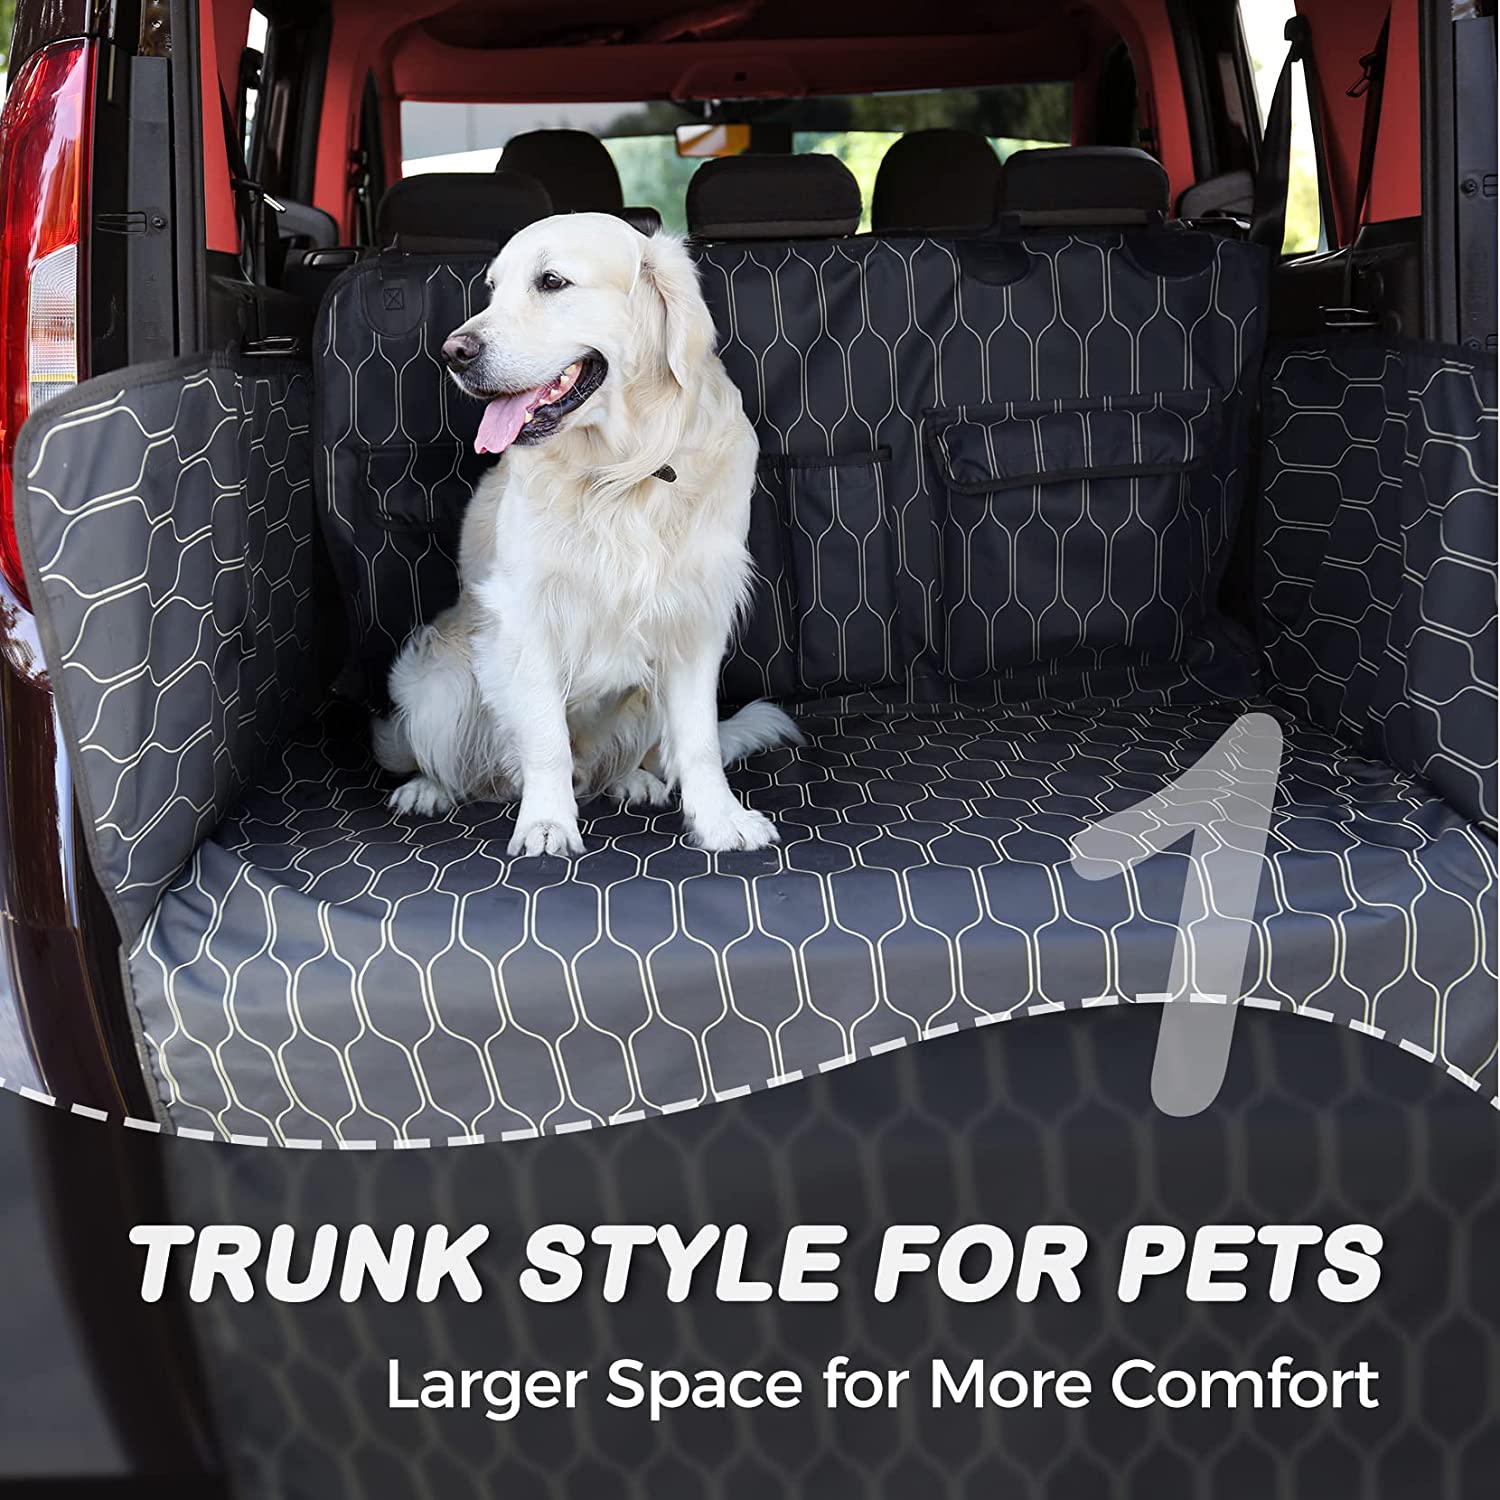 Cargo Liners - Paw Prints Trunk Protector for Dogs - India